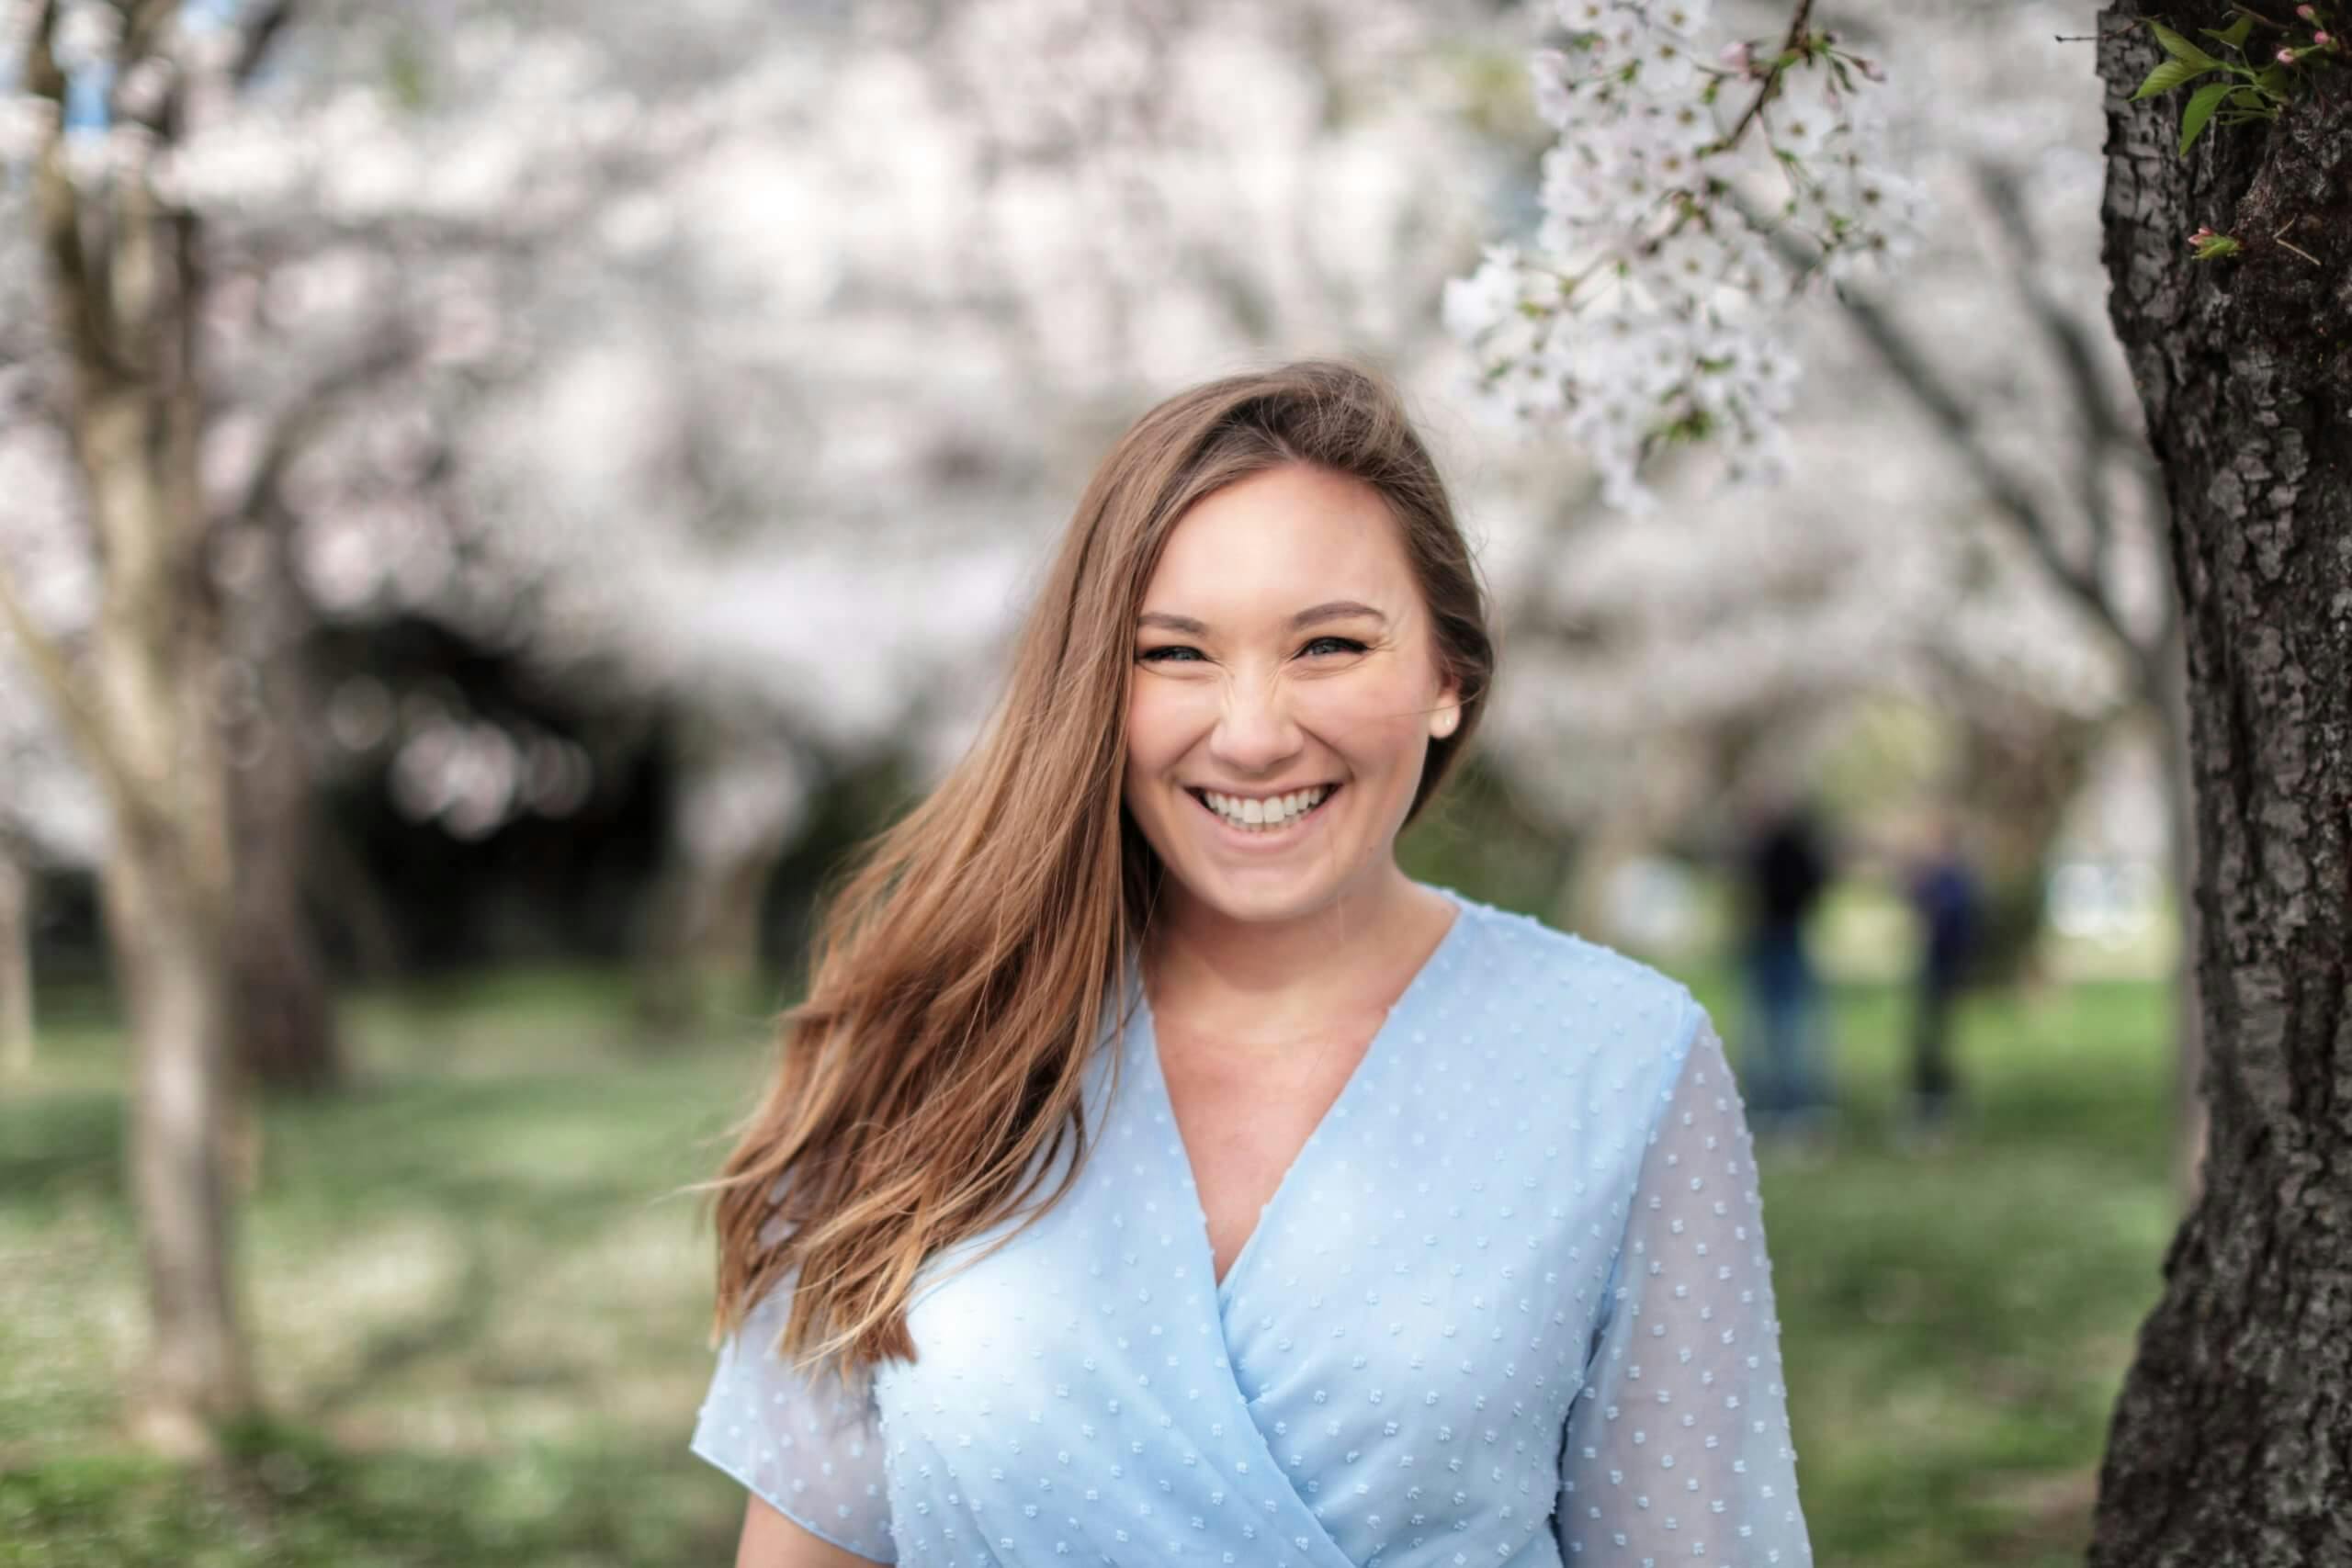 A portrait of a smiling woman with cherry blossoms in the background.